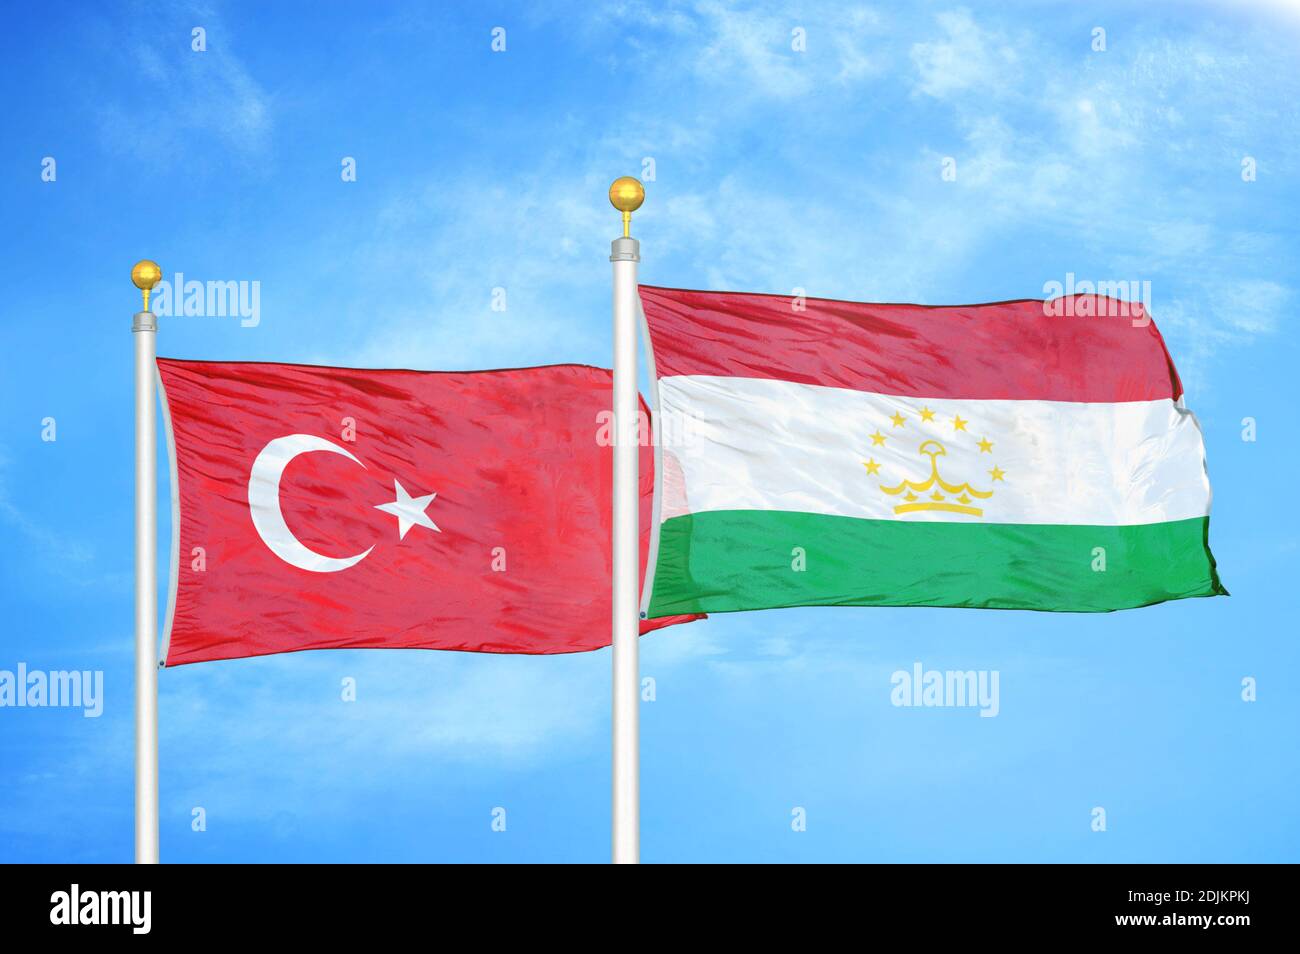 Turkey and Tajikistan two flags on flagpoles and blue cloudy sky Stock Photo